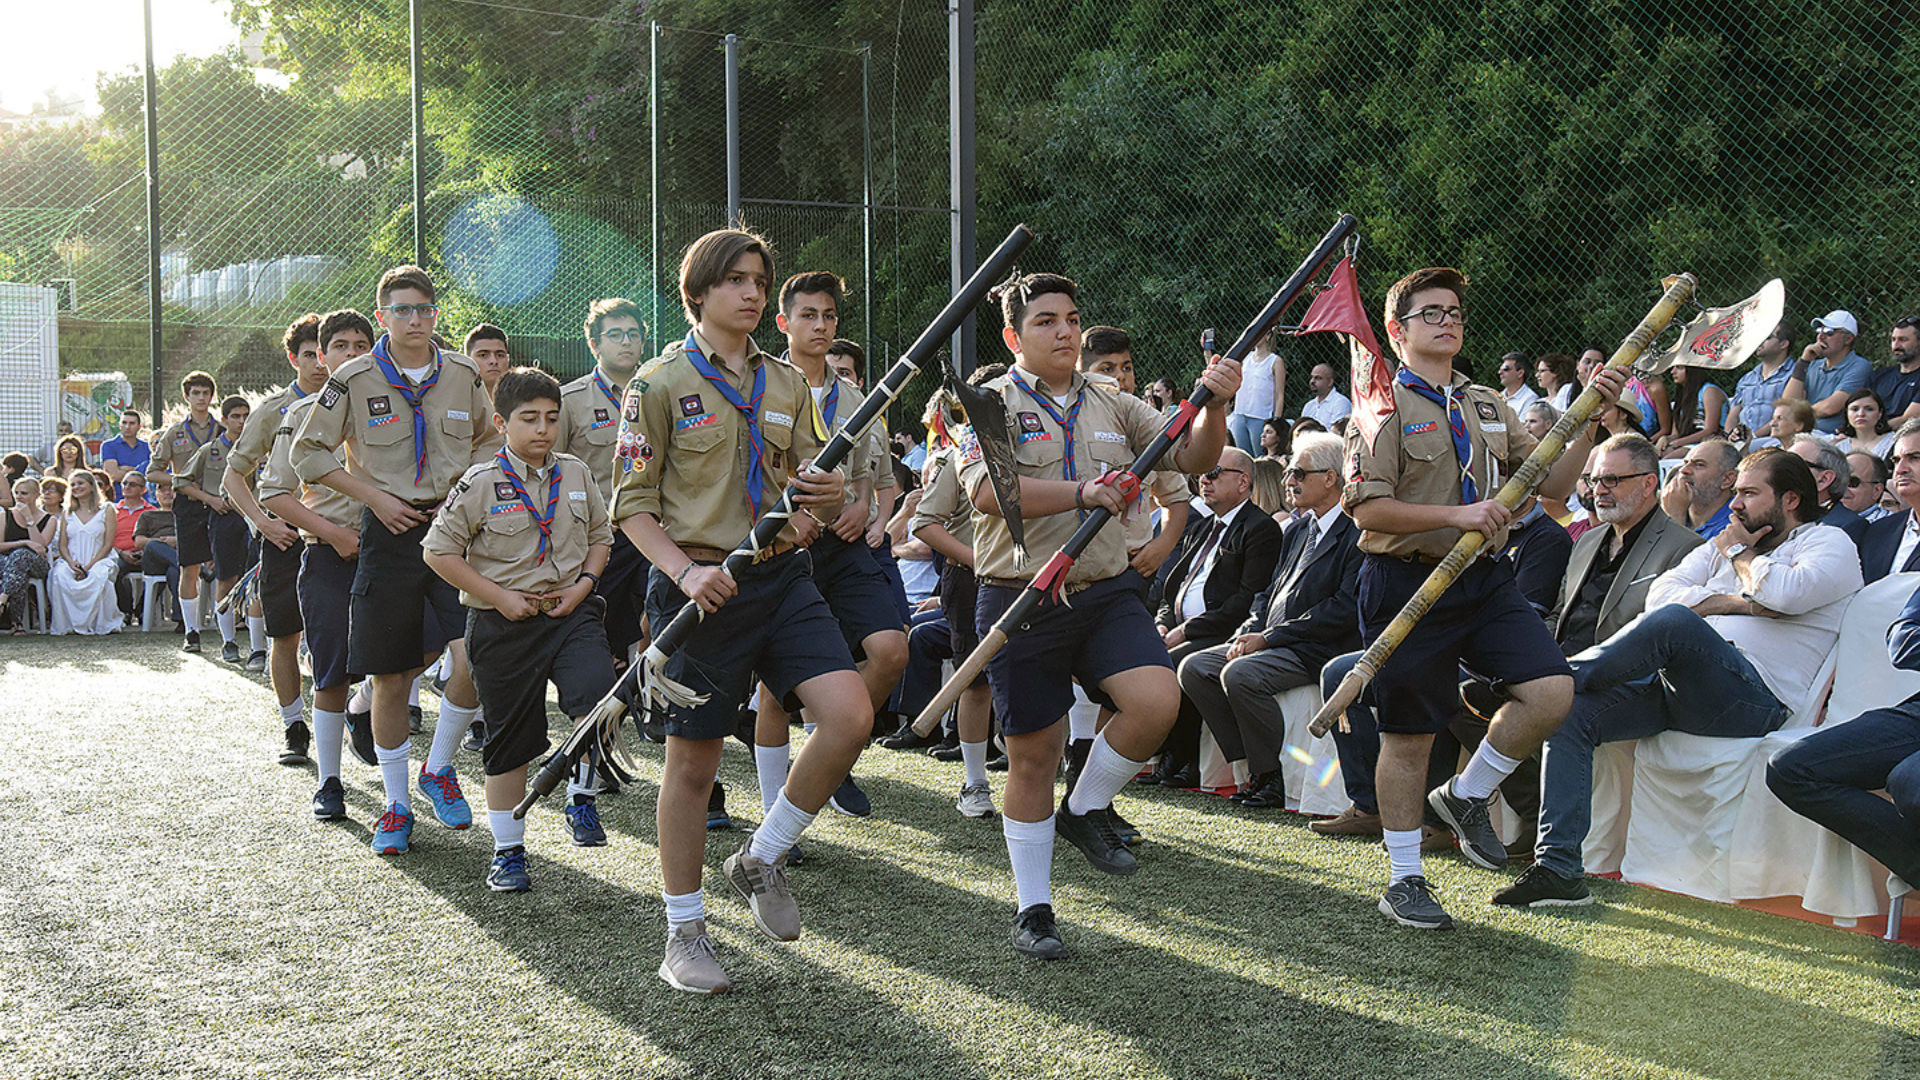 The AYA Antranik Antelias Scouts of Lebanon marching in sync at the 2019 Youth Festival.